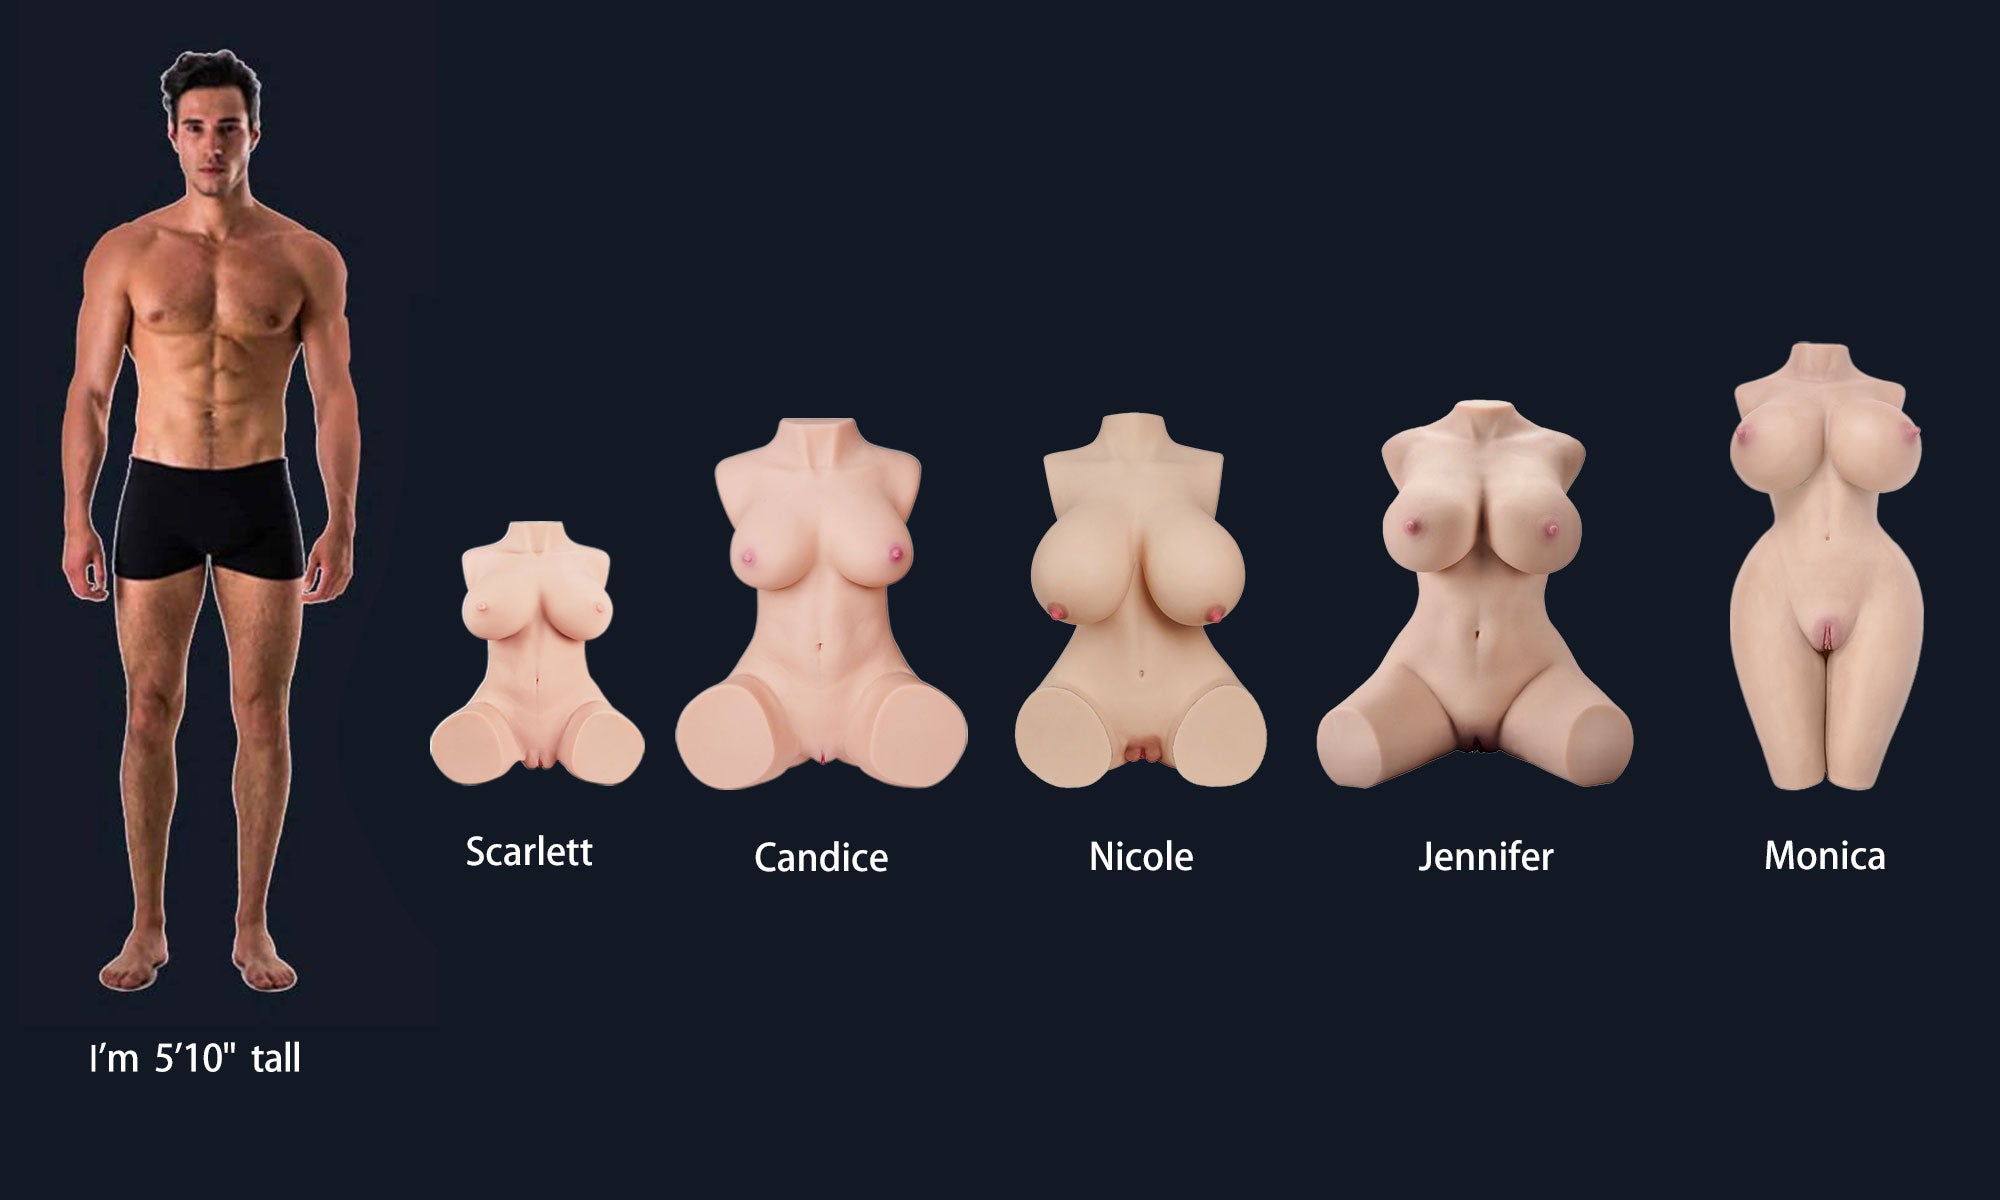 nicole doll comparison with  other hot dolls.jpg__PID:91586700-3fdc-4264-bcc7-d0649e0c6951